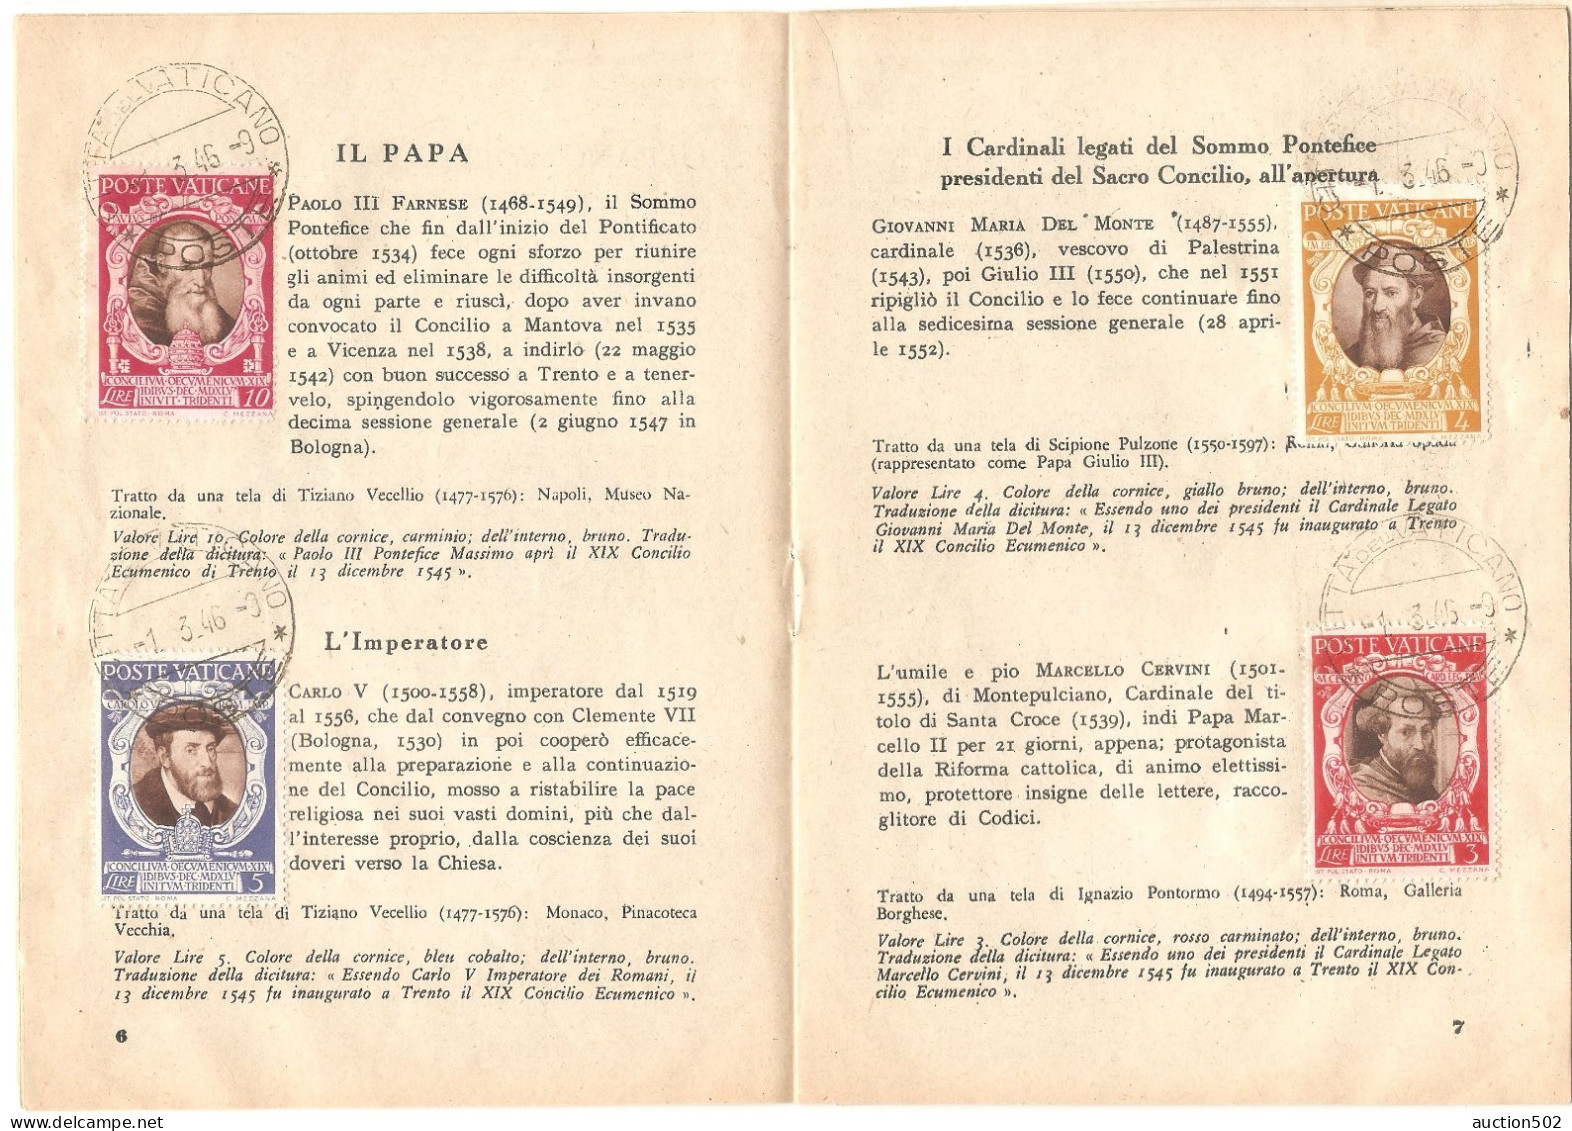 Vatican Y& T Nr AM 20-21 - MS 1 - 167 > 171 - 173  * stuck on the display + set 1946 128 > 139 canc.